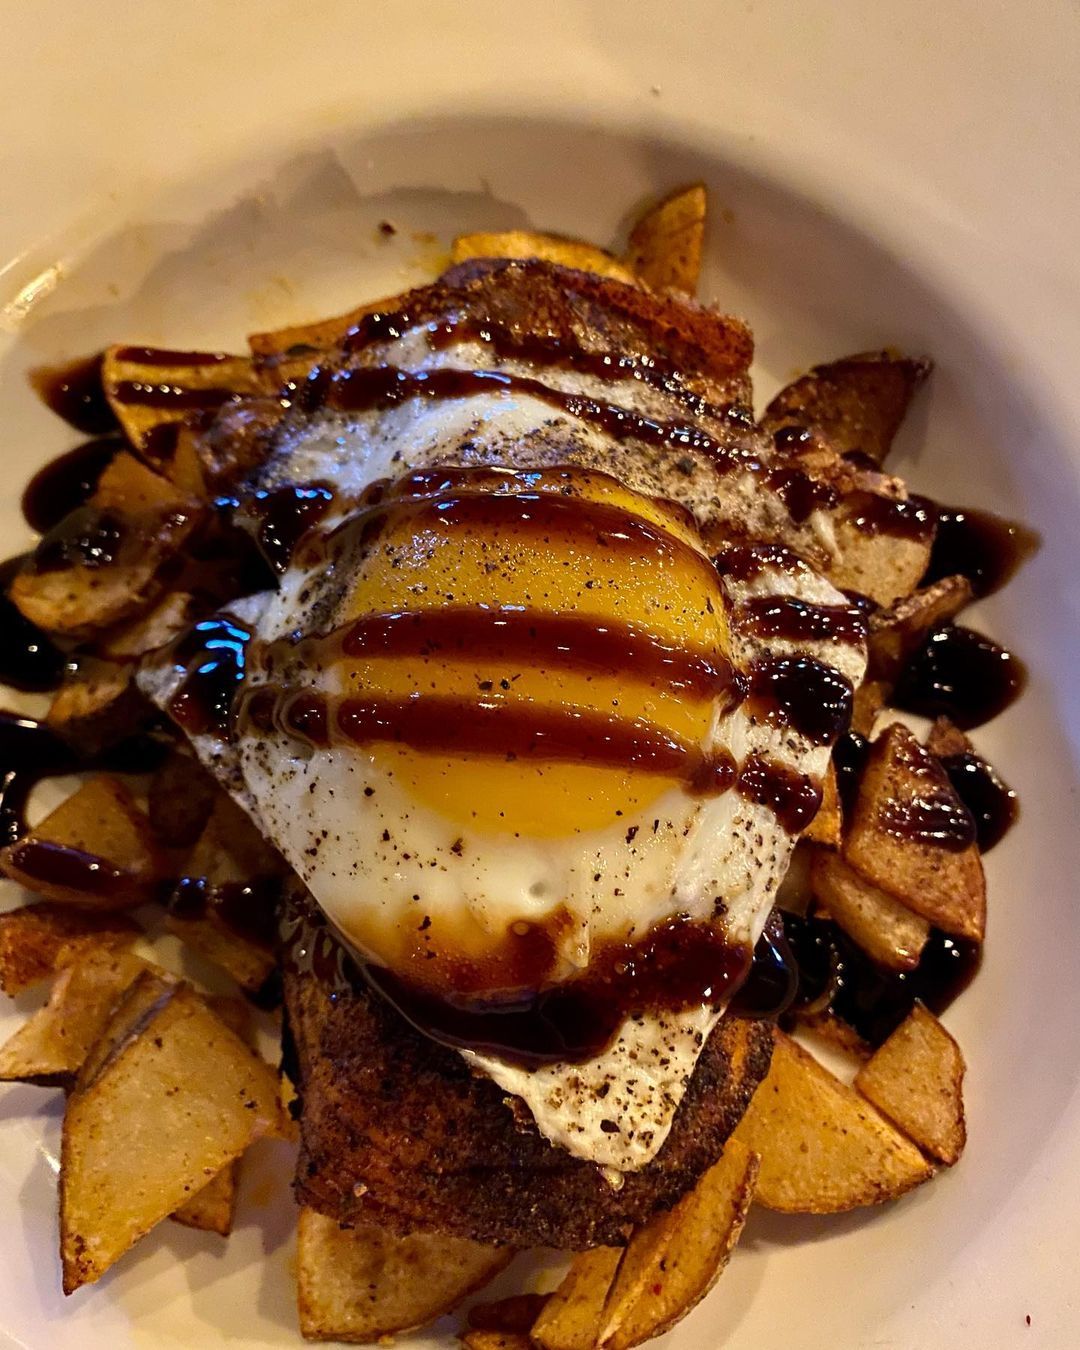 Late night bites: A plate with a fried egg and fries, perfect for a midnight snack.